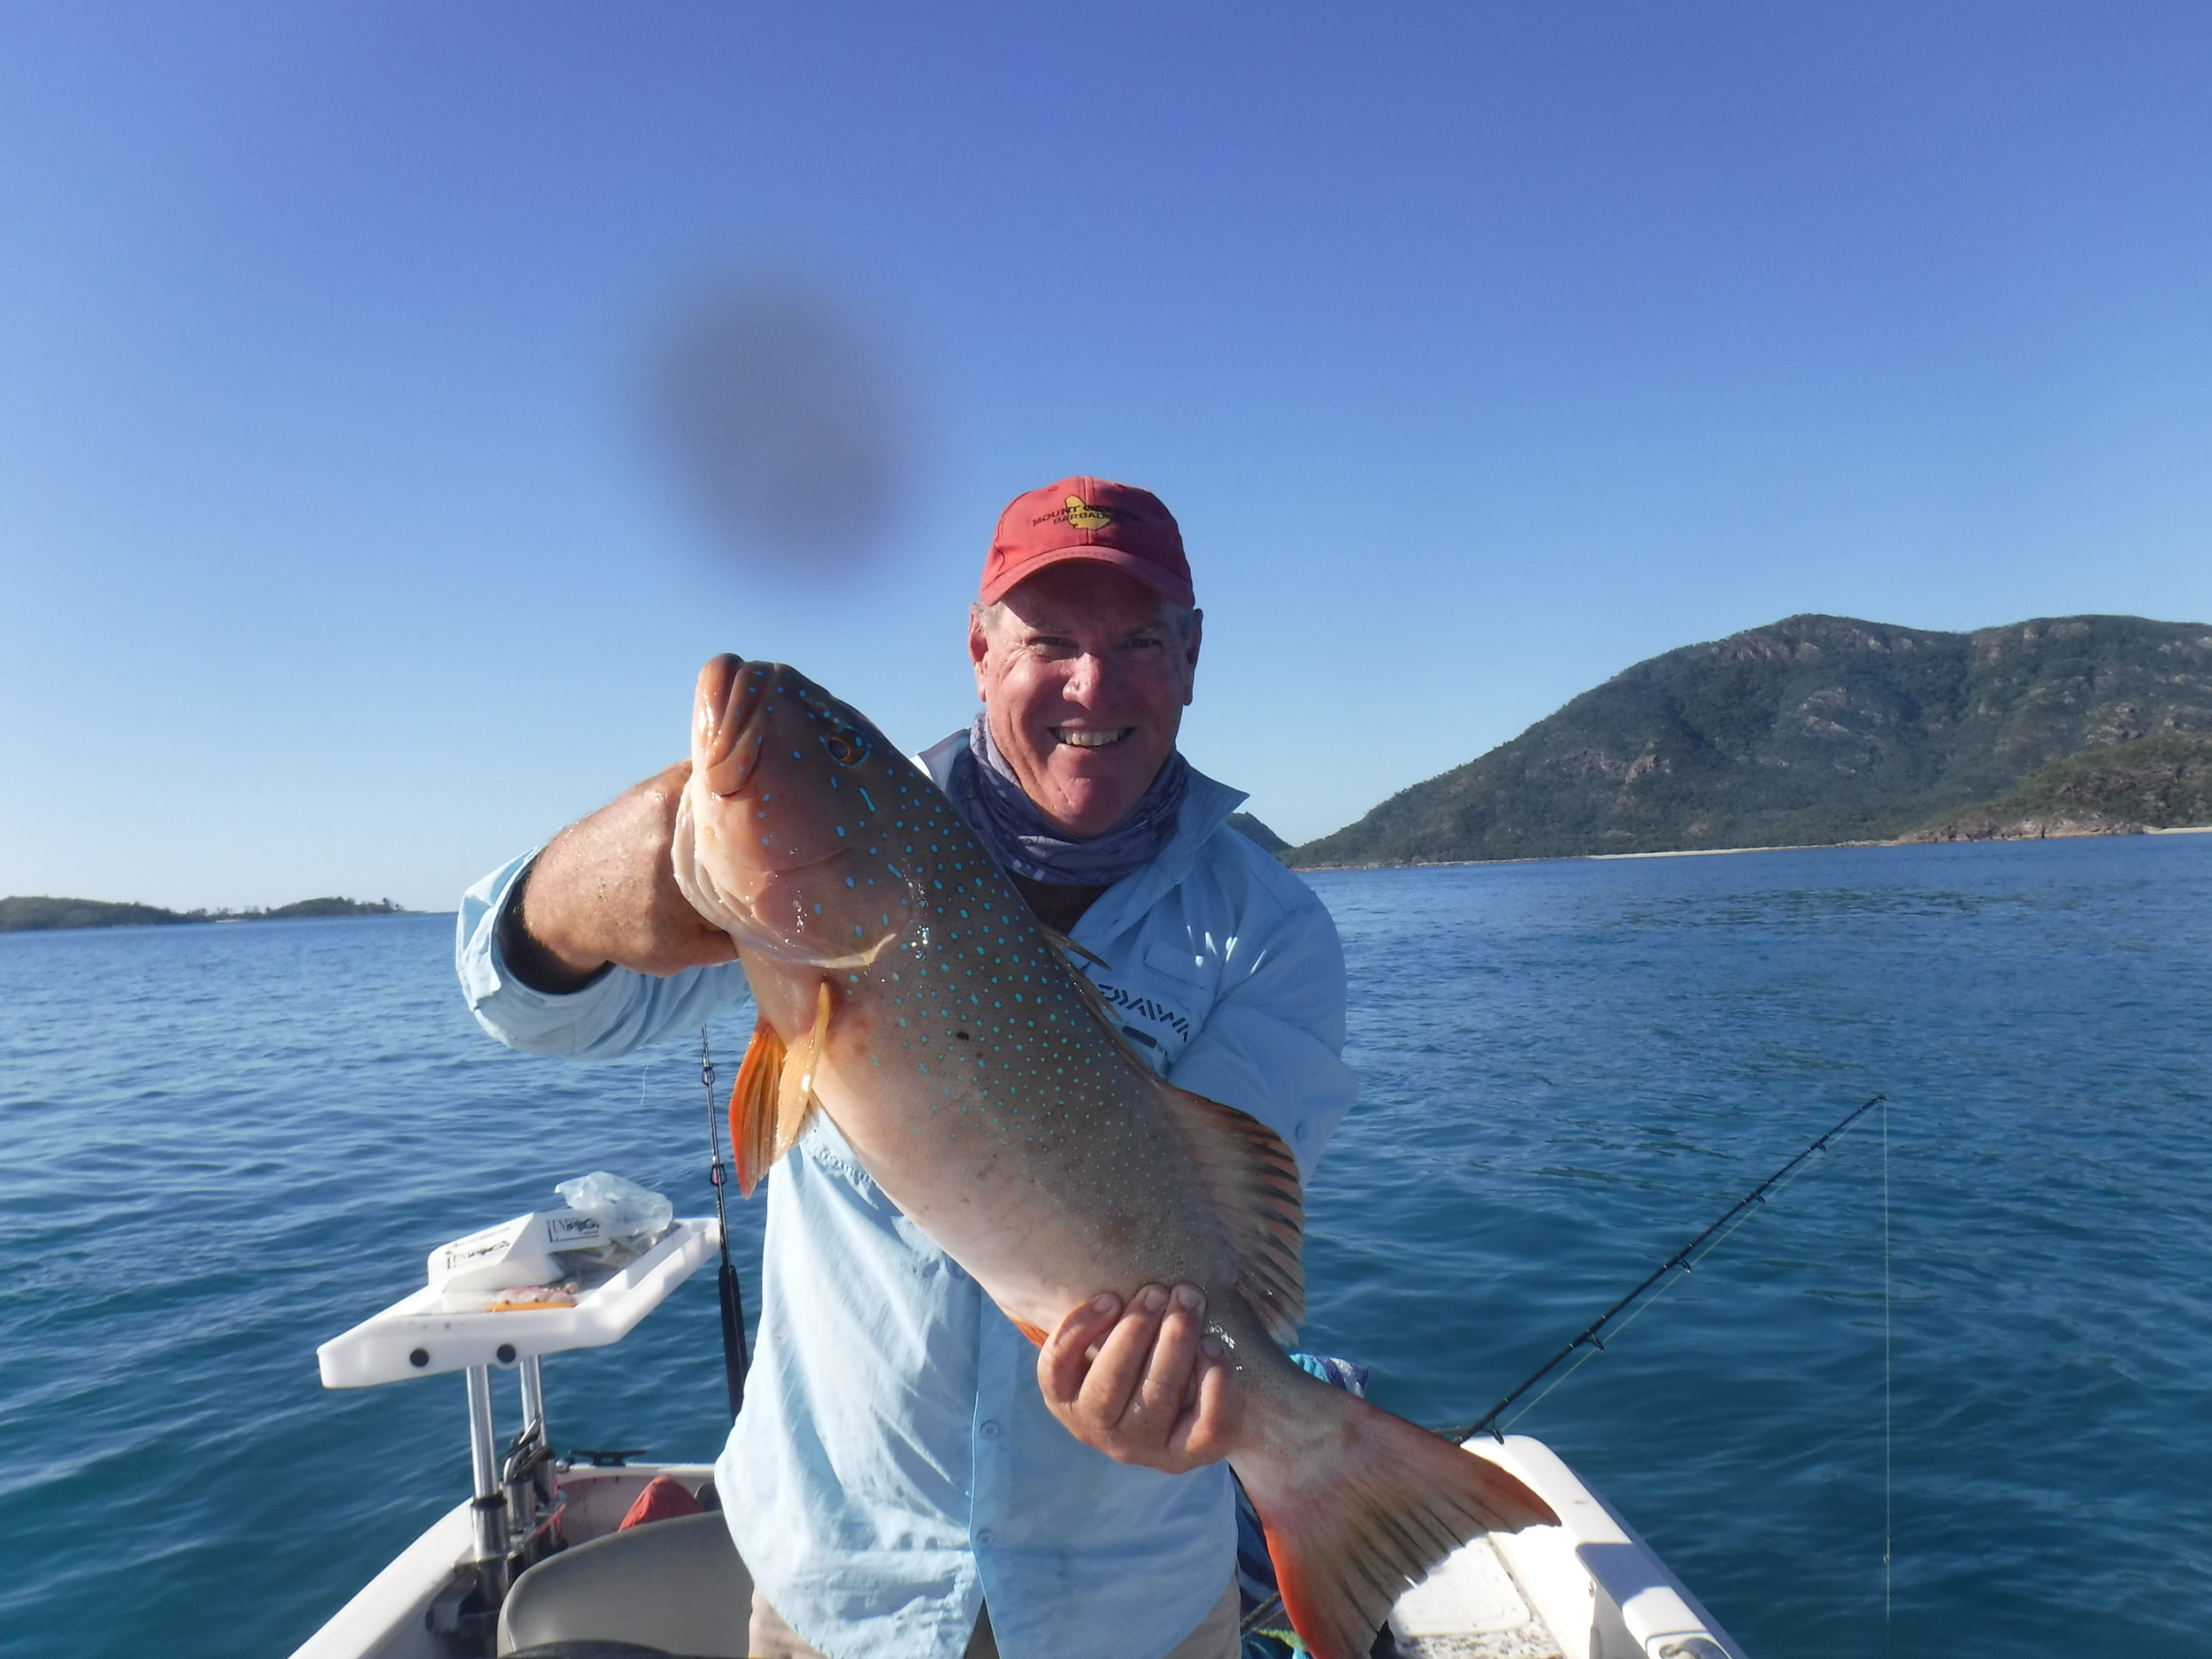 One of 4 Coral Trout in 20 minutes. This one was a bit big for the BBQ. Sorry about the smudge on the lens in next 3 photos.